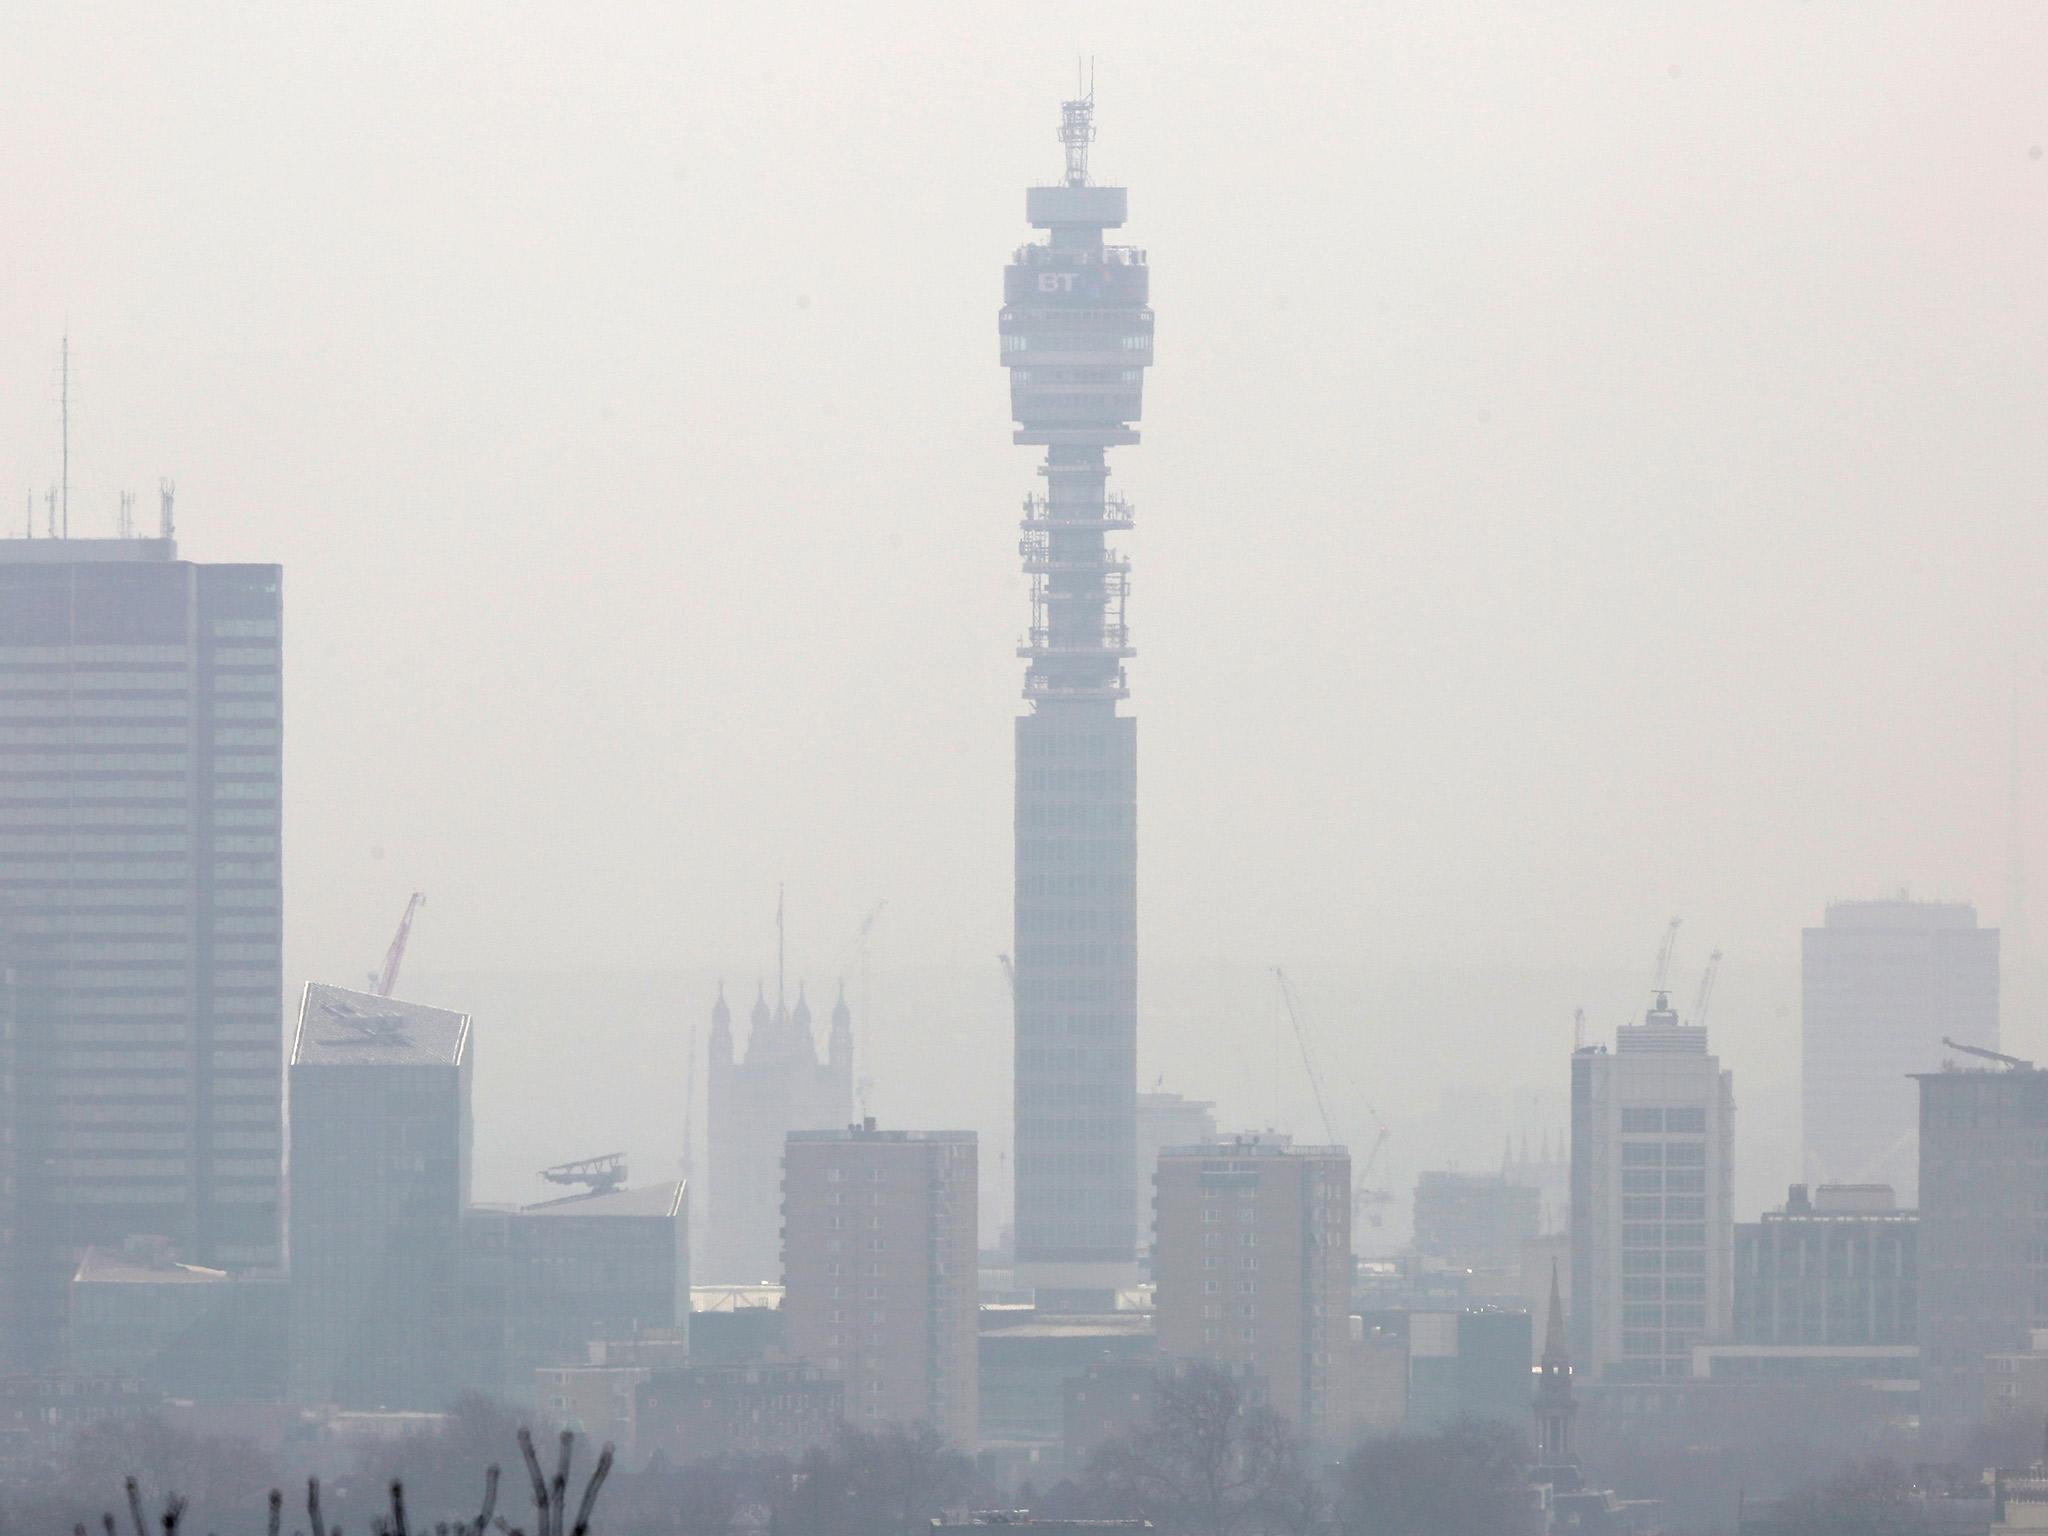 The UK Government estimates air pollution causes the premature death of 40,000 people a year